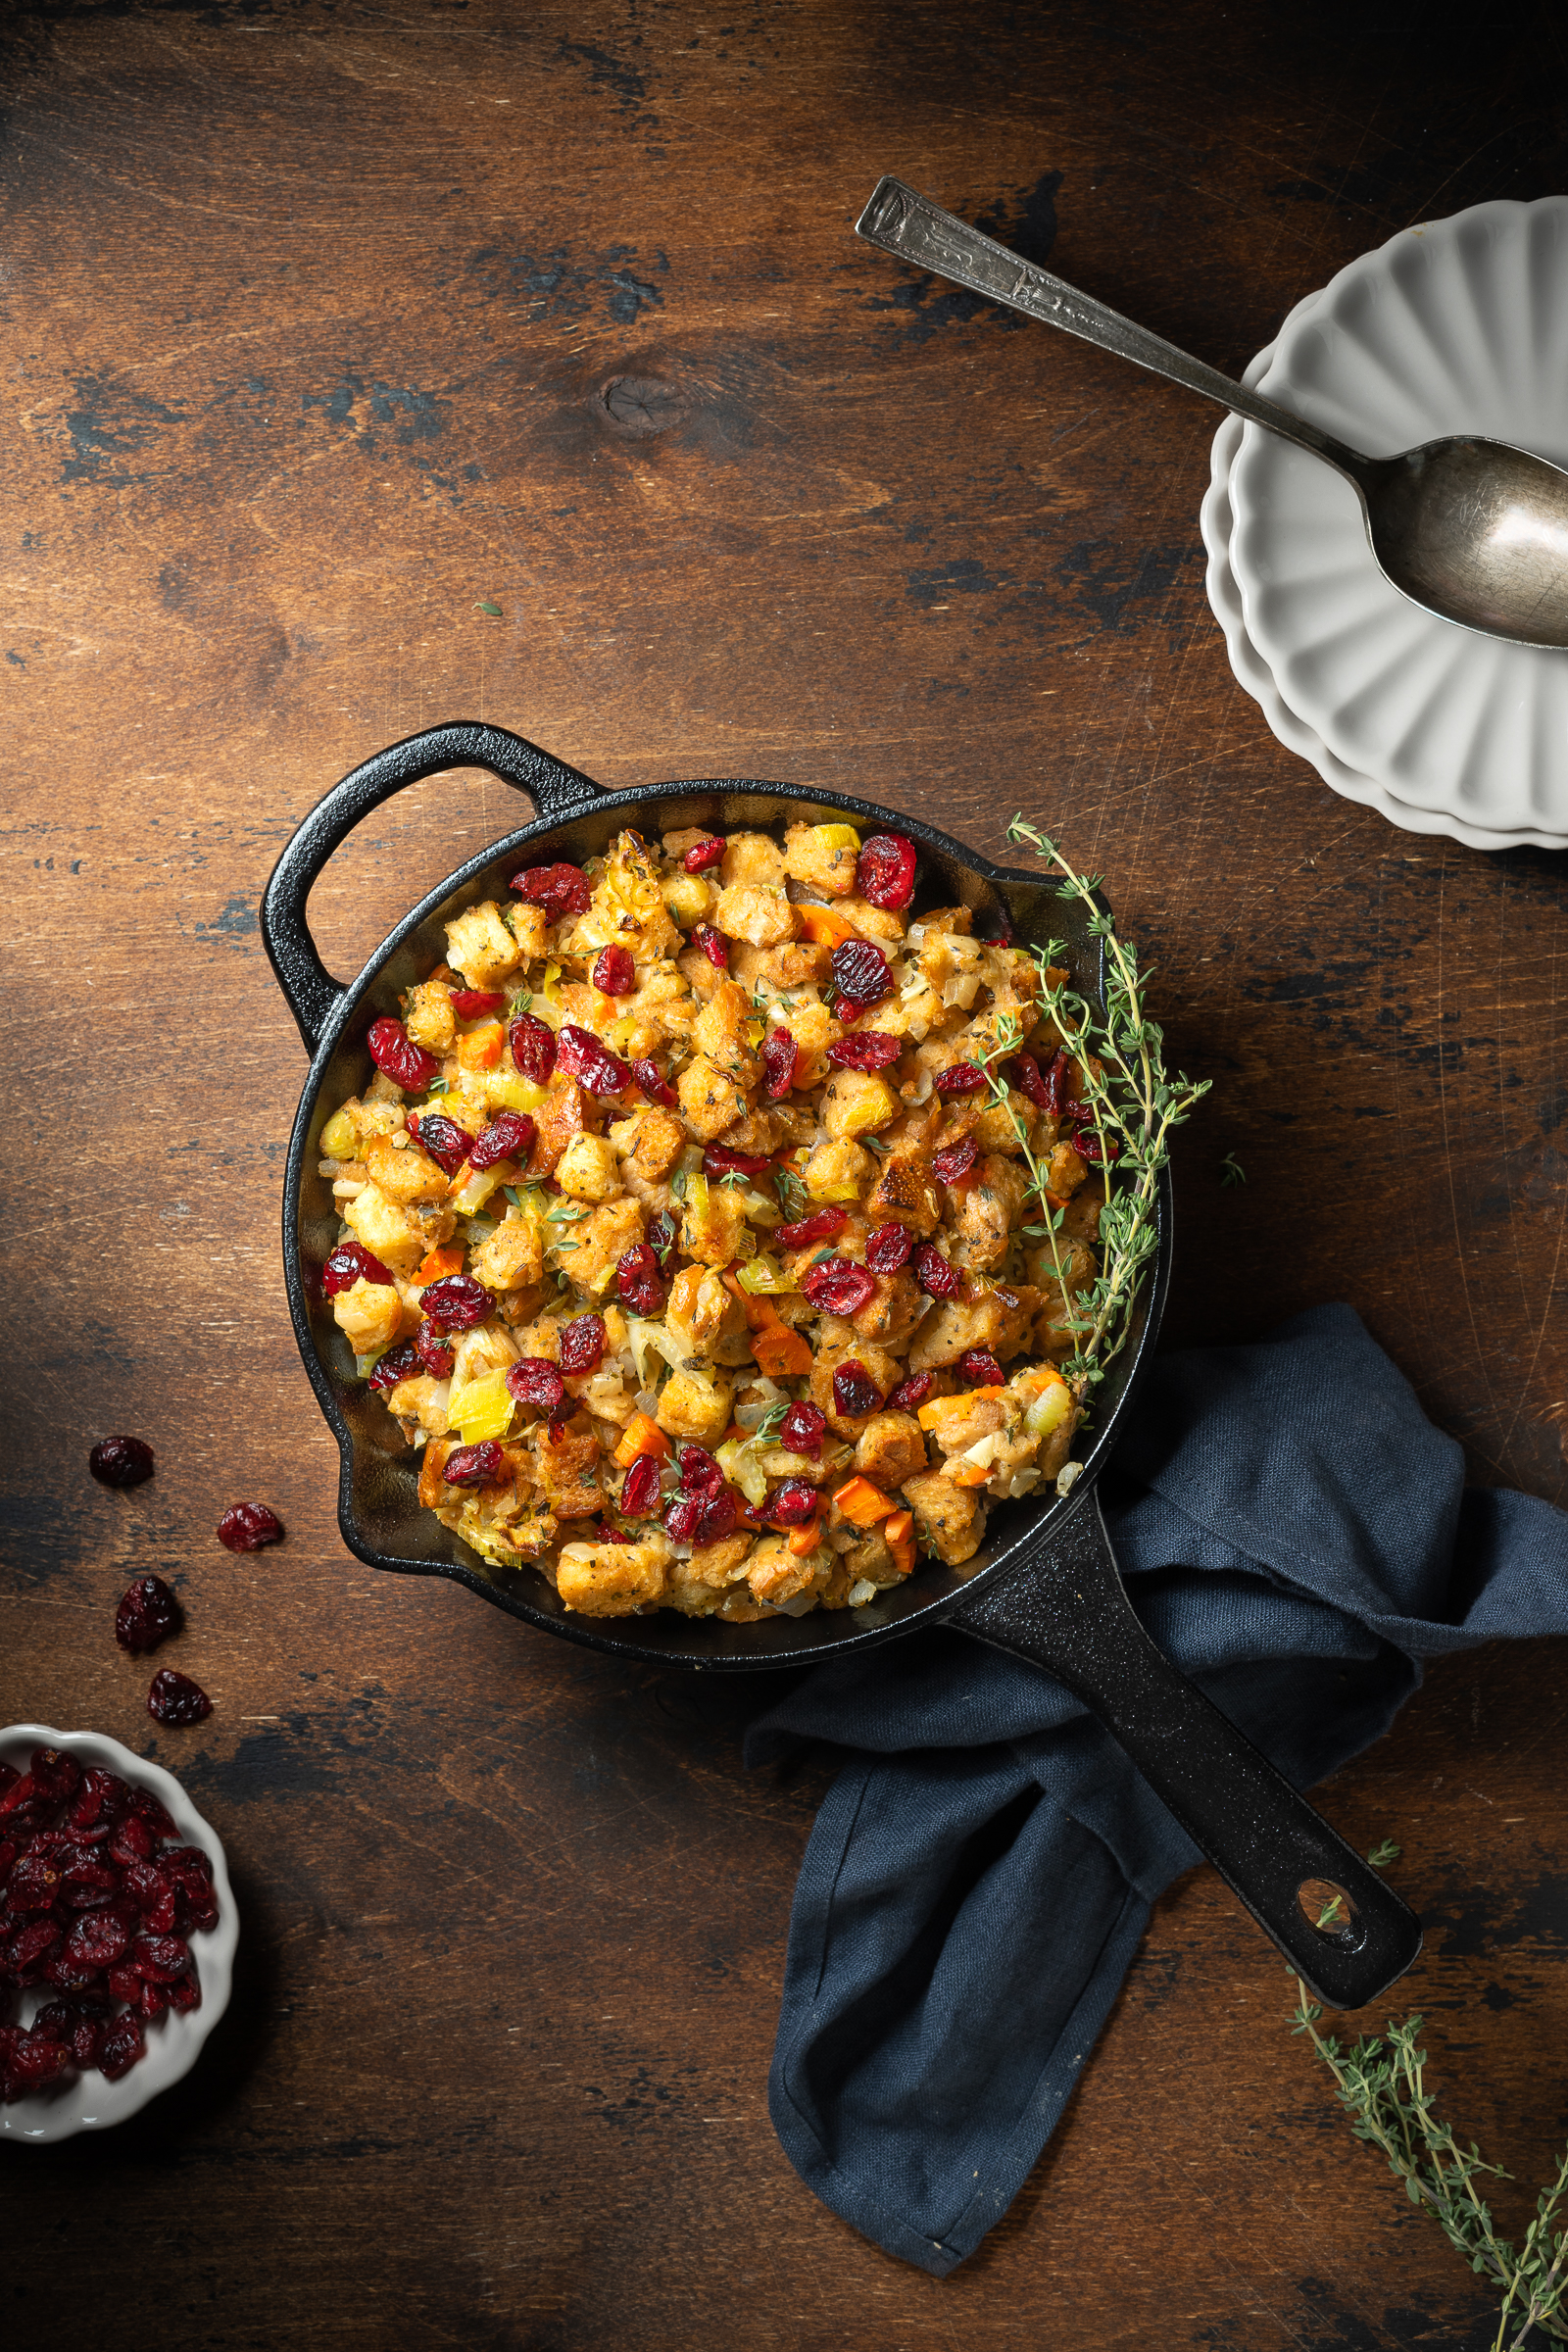 Stove top stuffing in a skillet, garnished with cranberries.